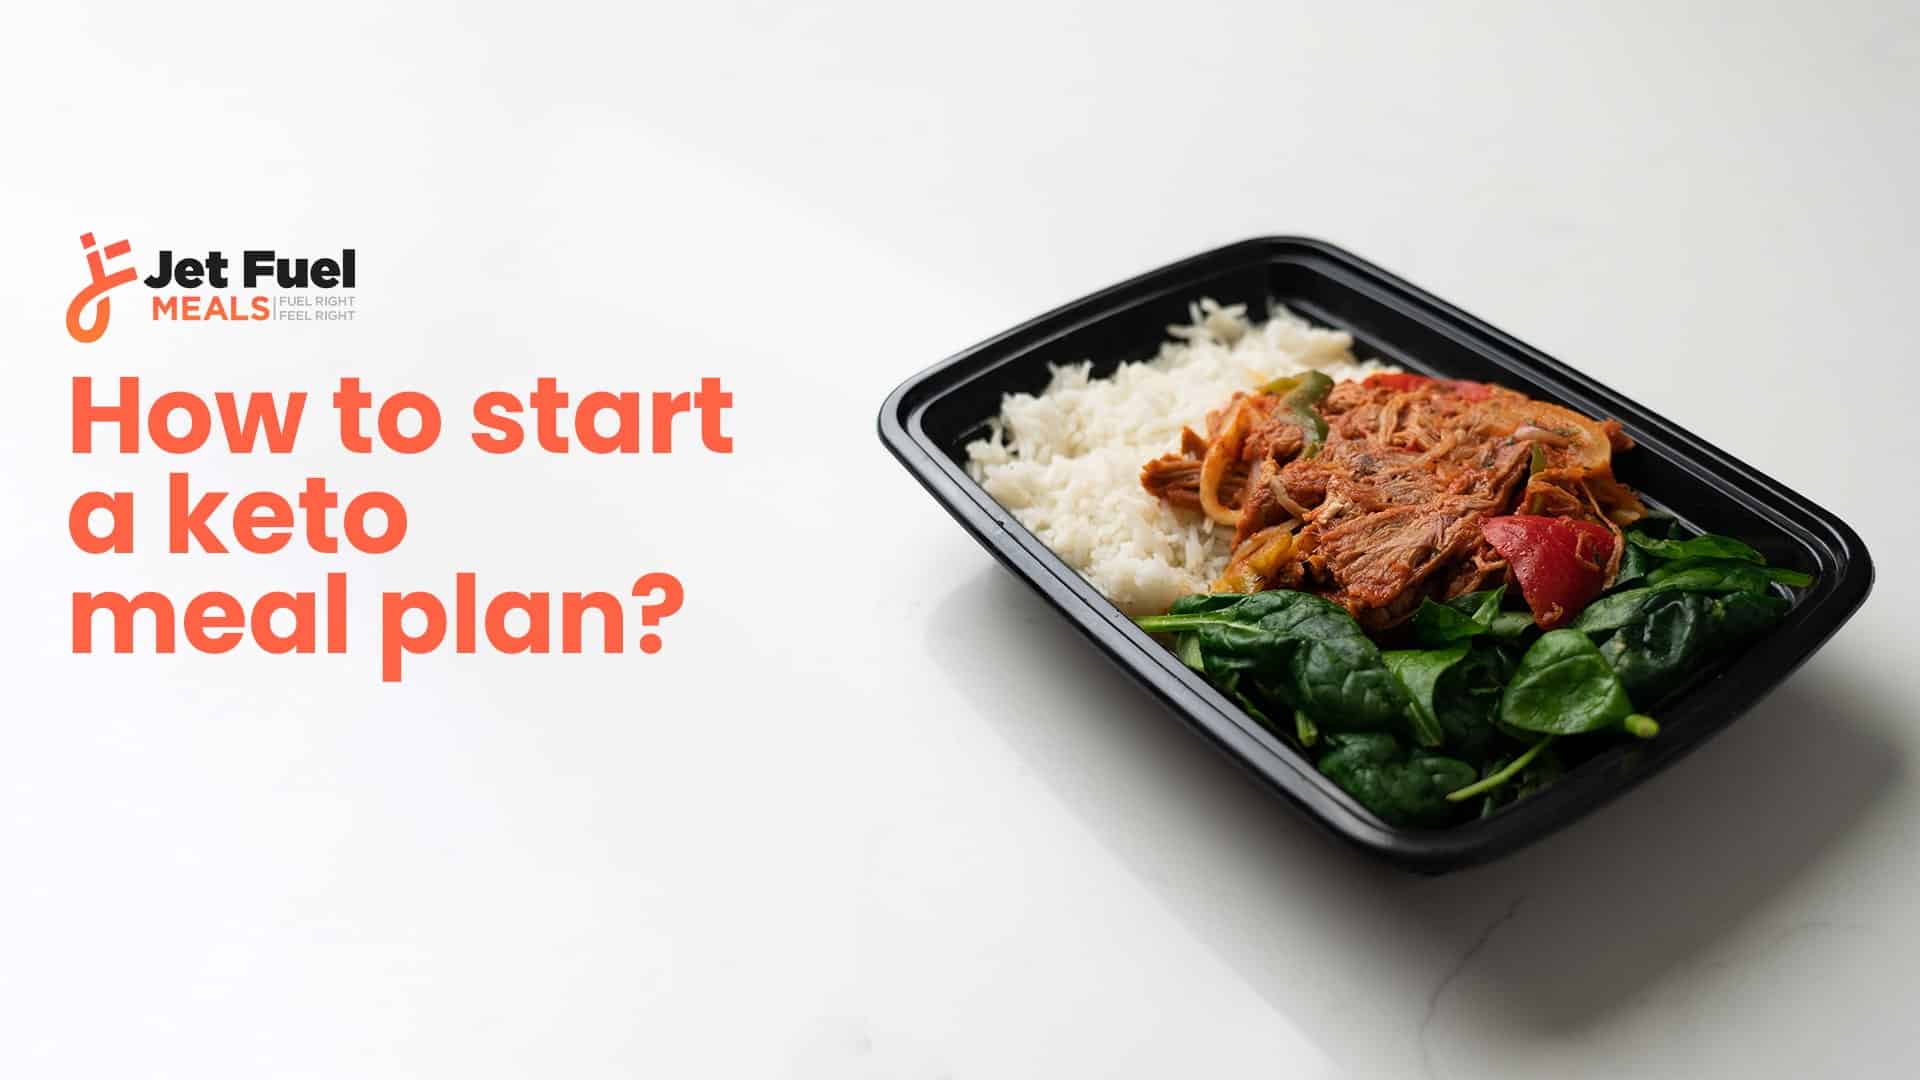 How to start a keto meal plan